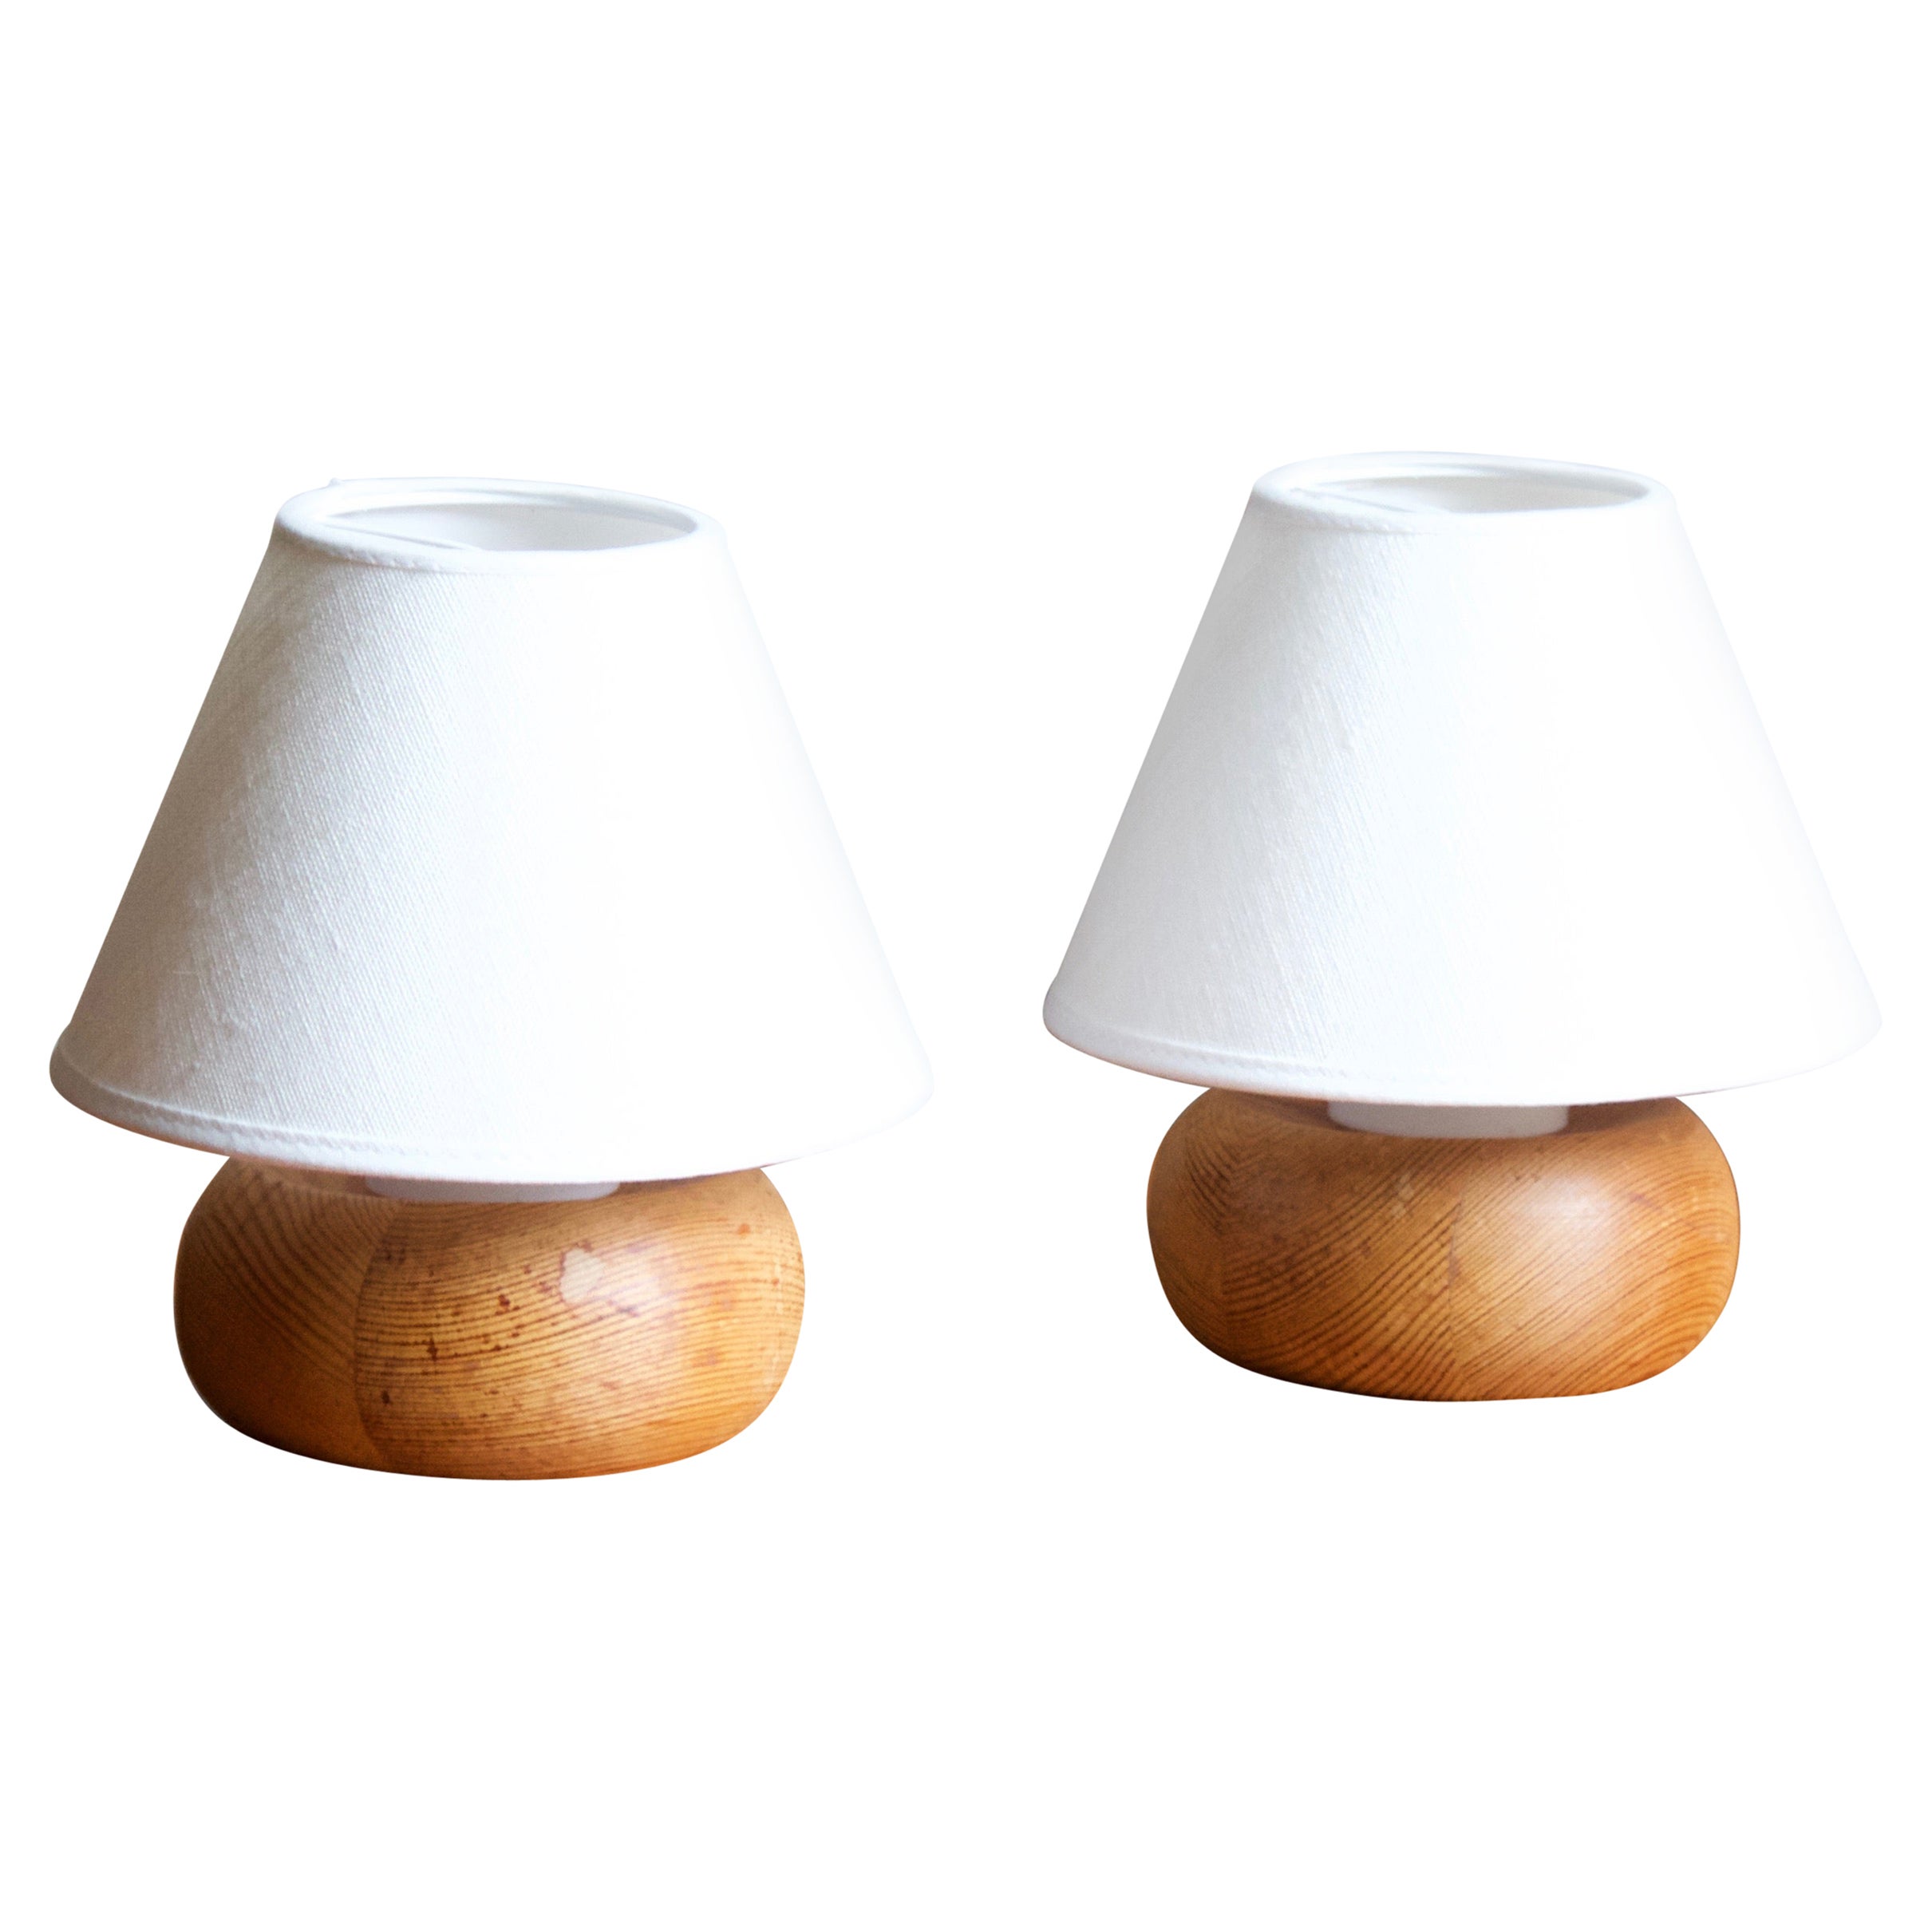 Nils H. Ledung, Small Table Lamps, Pine, Linen, Bankeryd, Sweden, 1960s at  1stDibs | small bedside lamps, tiny table lamps, short table lamp